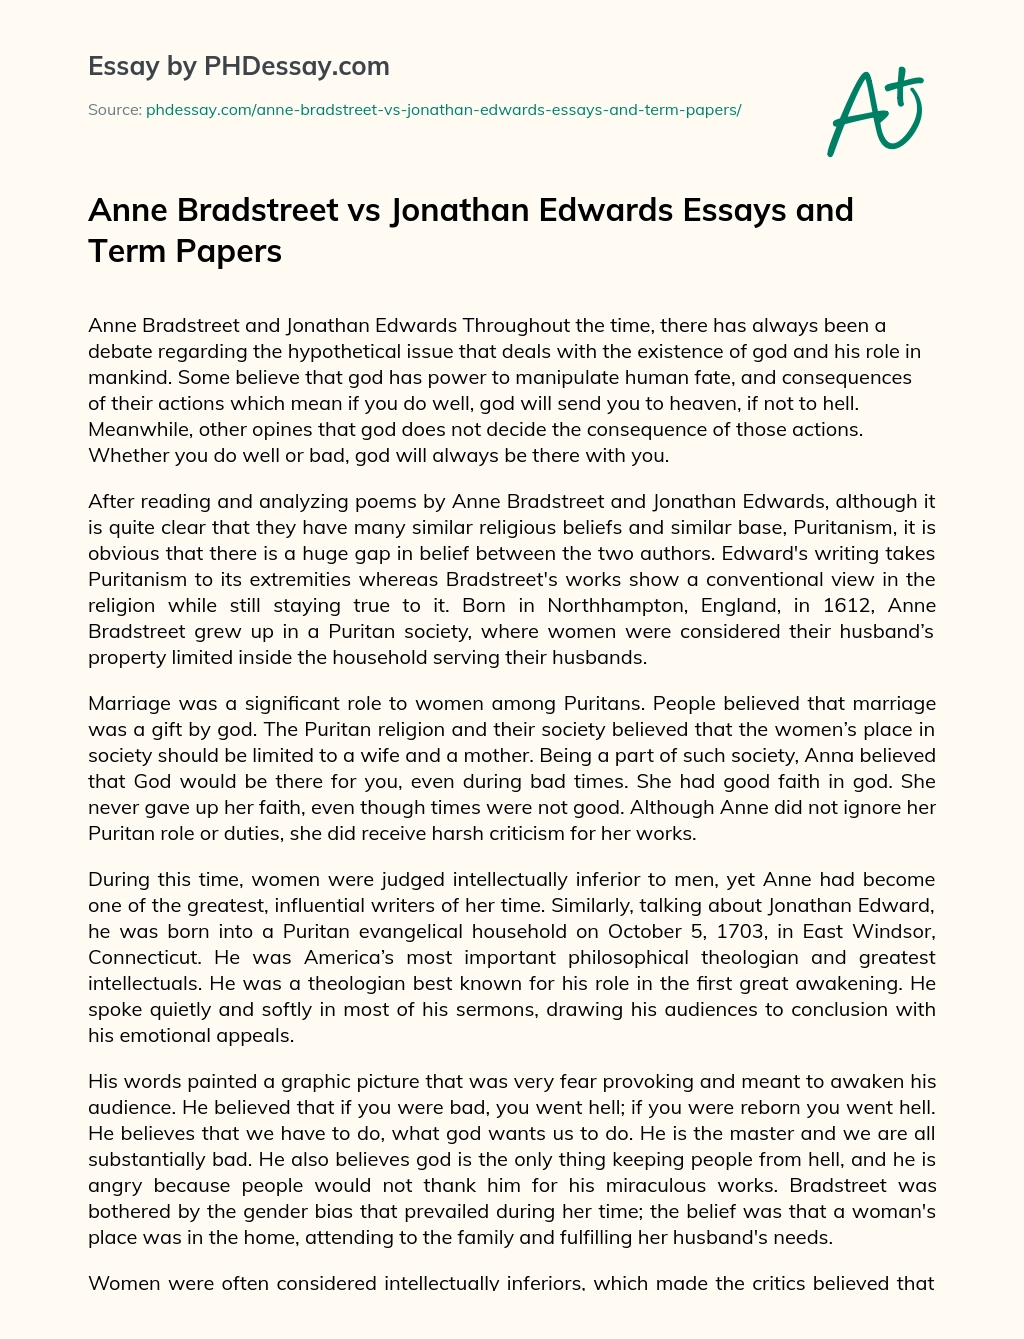 Anne Bradstreet vs Jonathan Edwards Essays and Term Papers essay